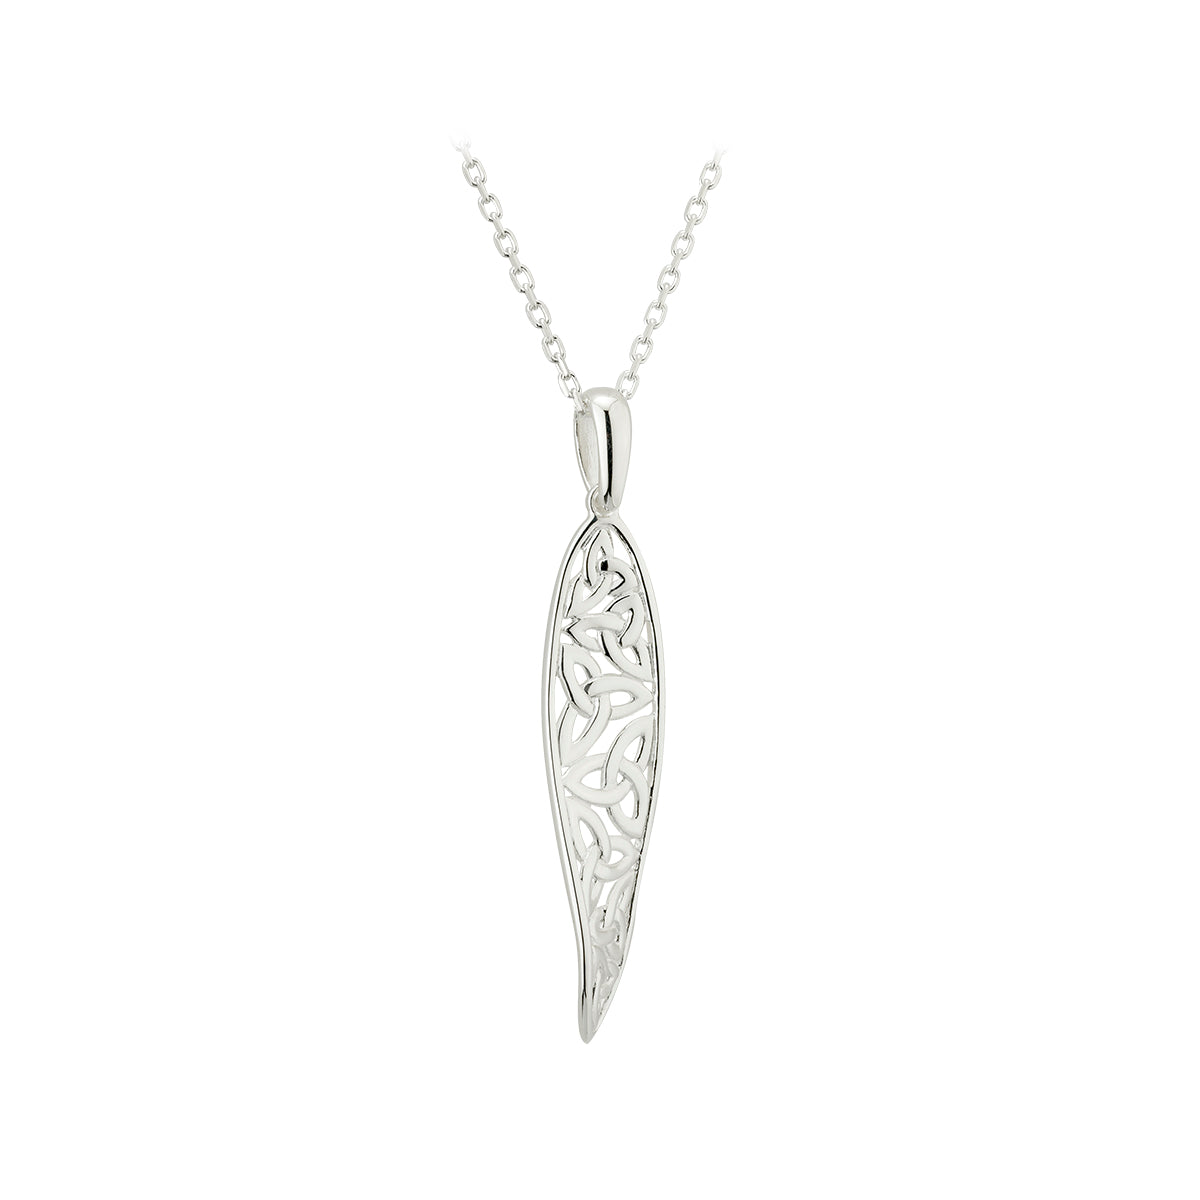 sterling silver long trinity knot twist pendant s46367 from Solvar